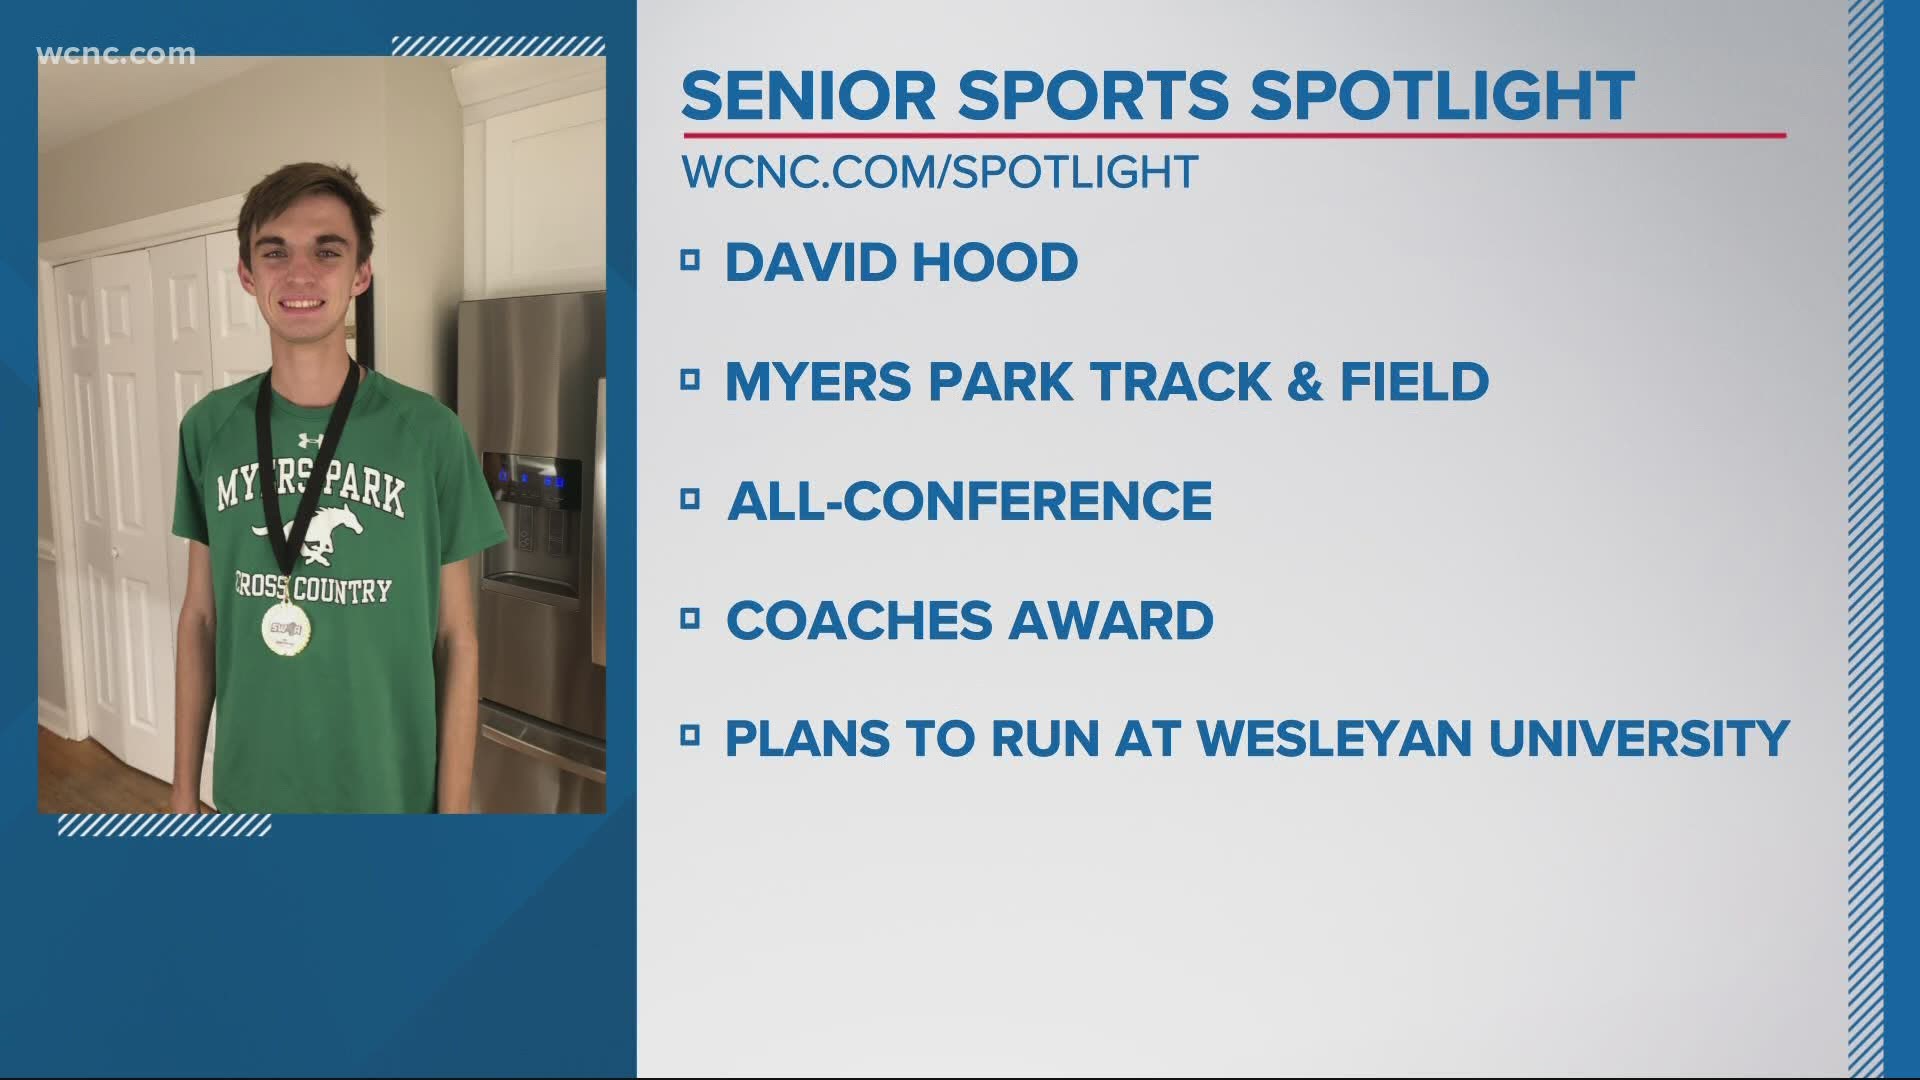 David Hood has run four years of track and cross country for Myers Park, and plans to continue his running career in college.